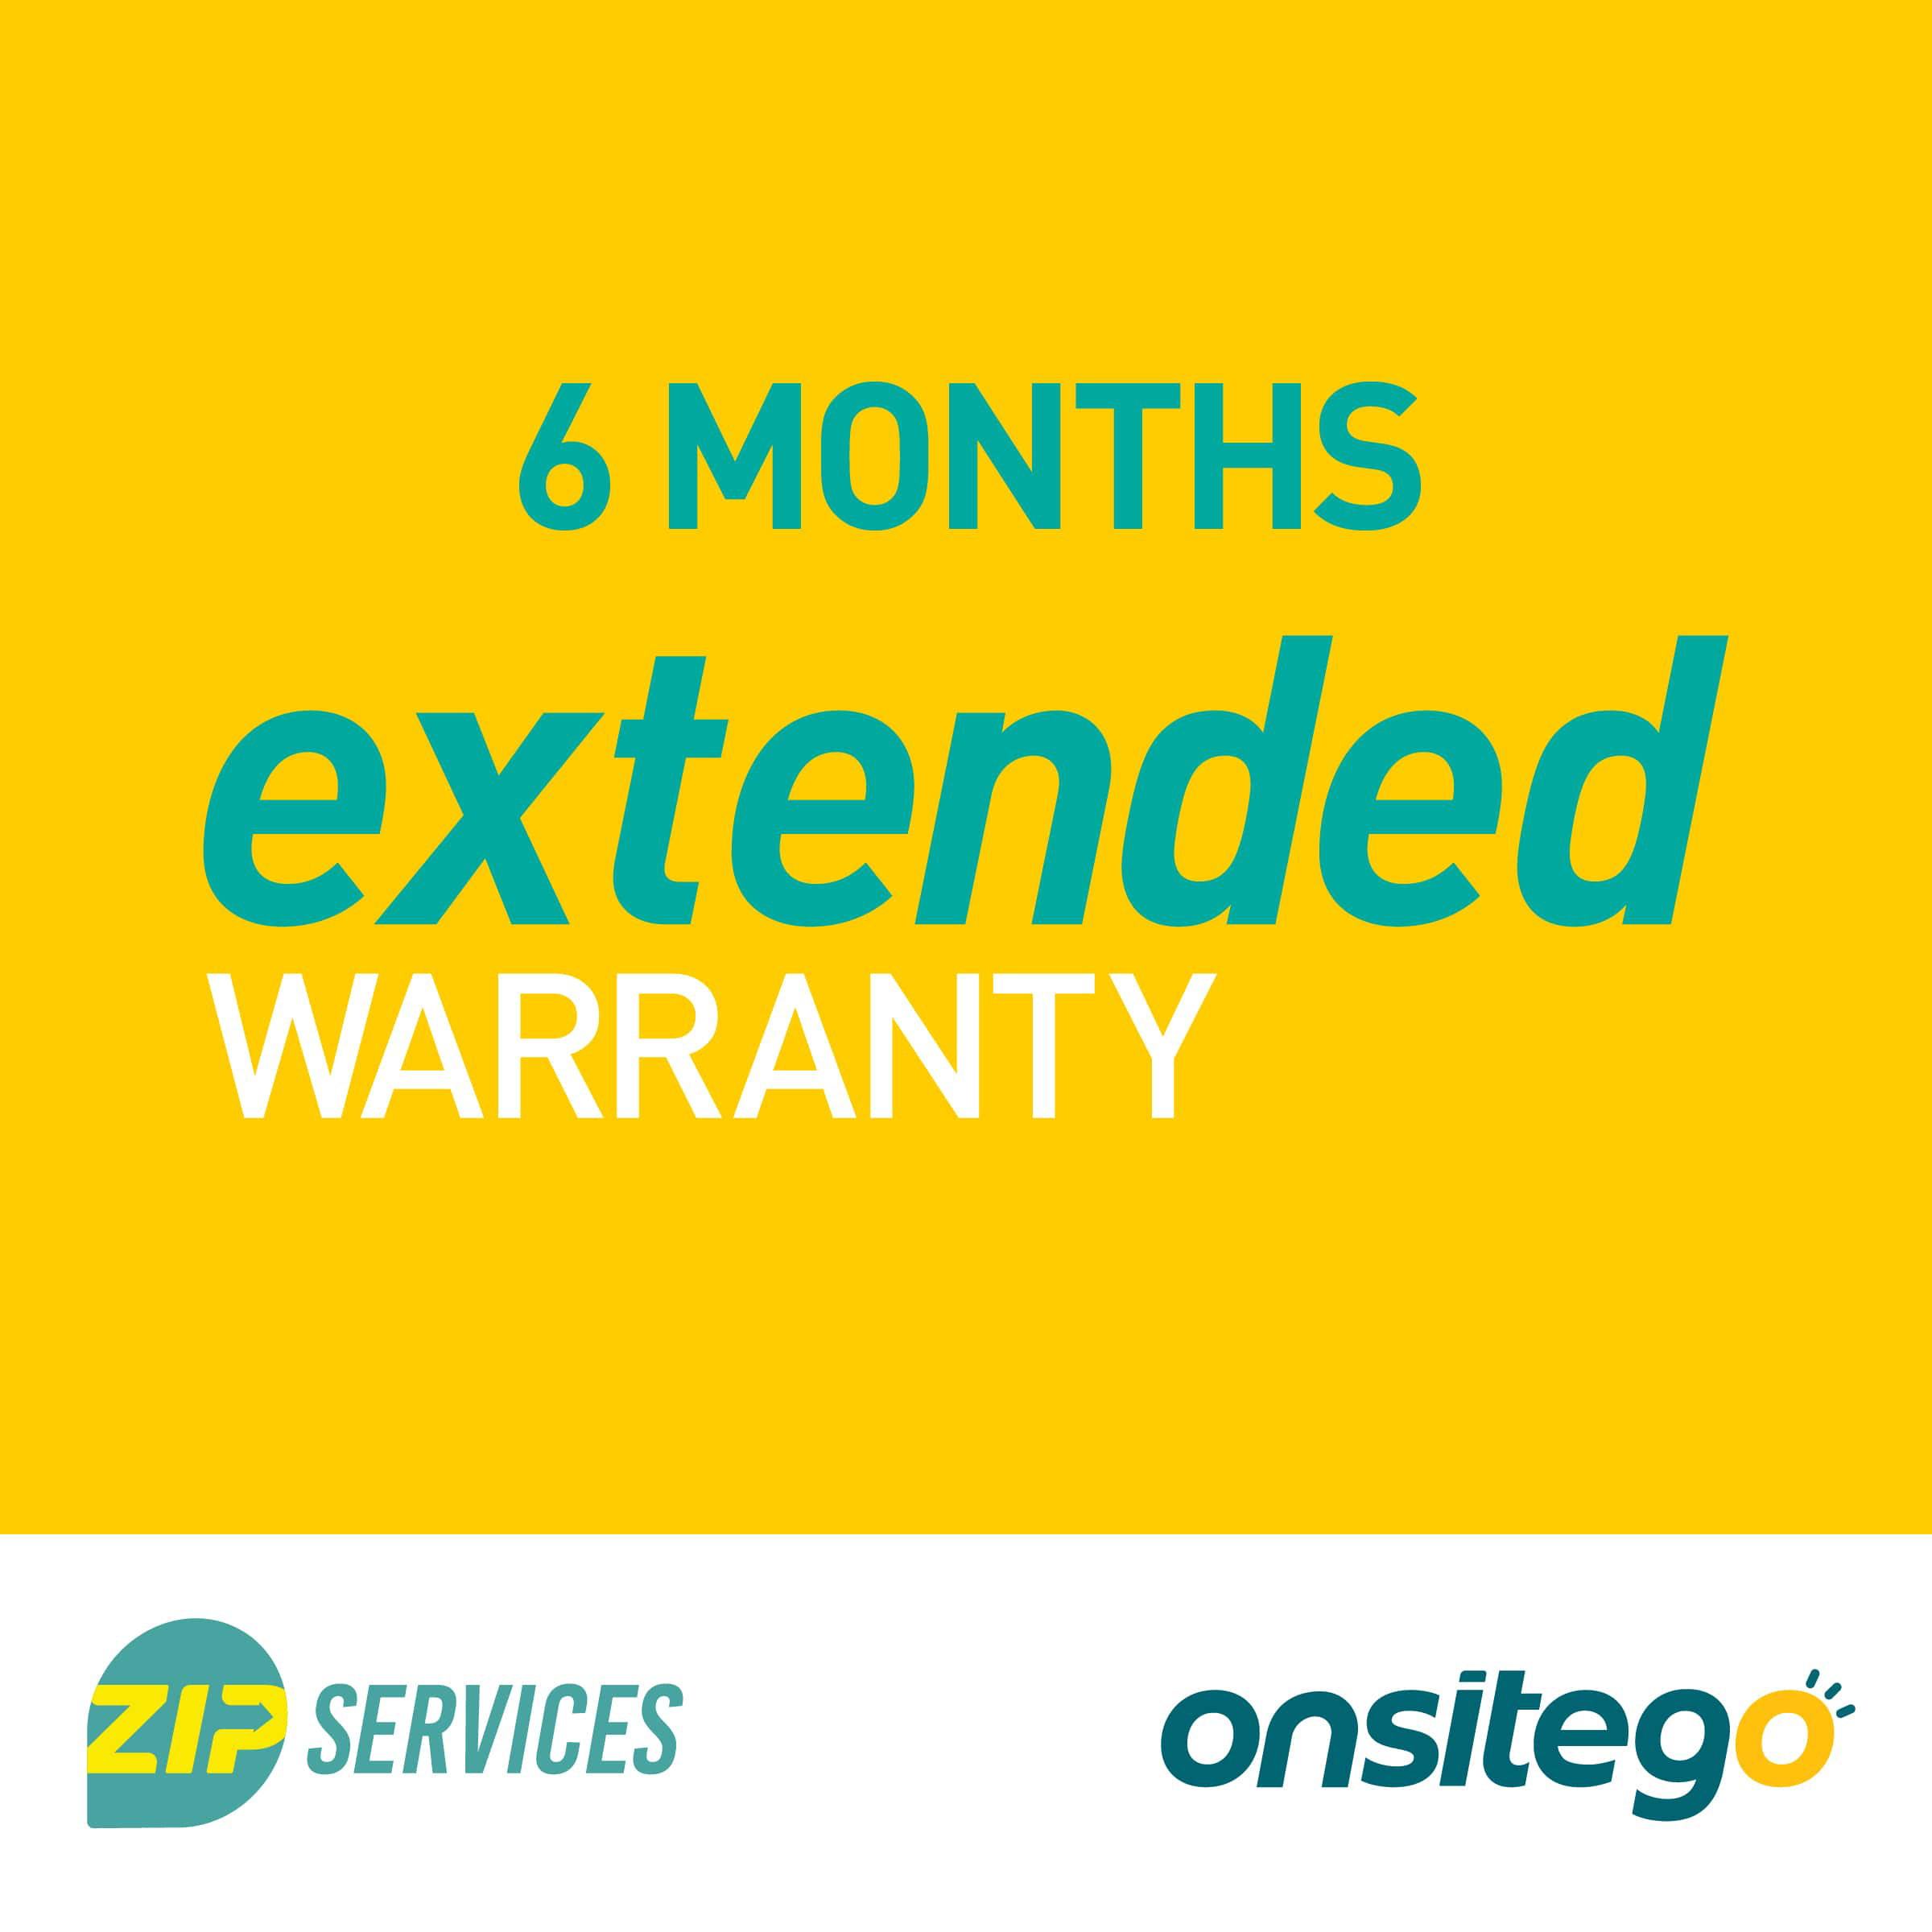 OnsiteGo 6 Months Extended Warranty for PC Accessory  Rs.9001 - Rs.10000_1